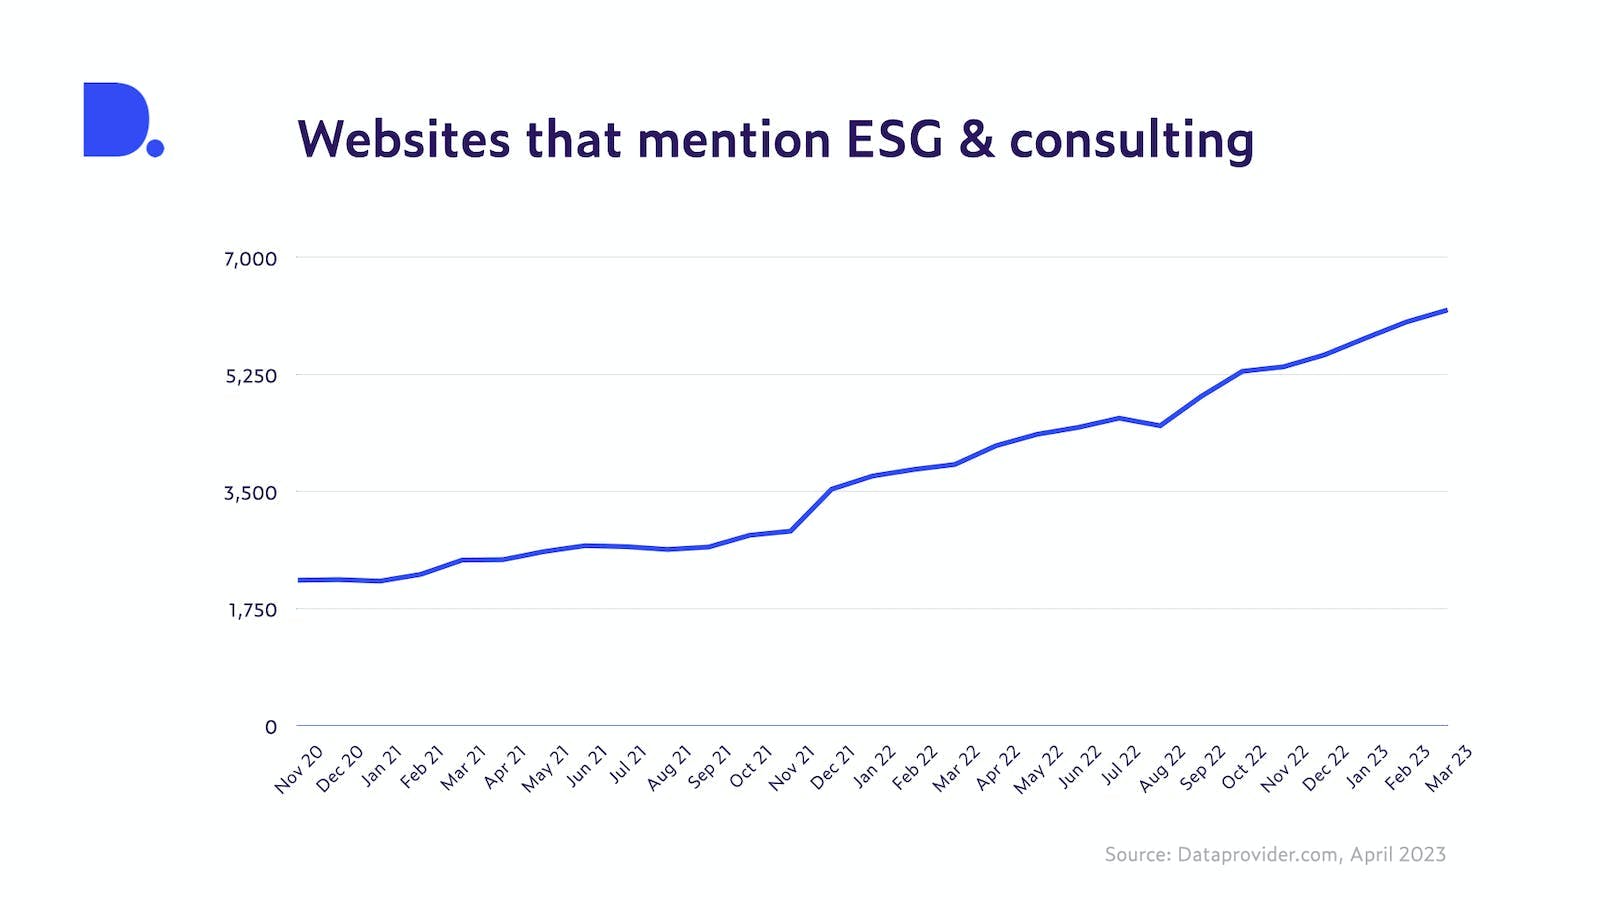 Number of websites that refer to consulting services and Environmental, Social and Governance (ESG) from November 2020 to March 2023 (Source: Dataprovider.com)